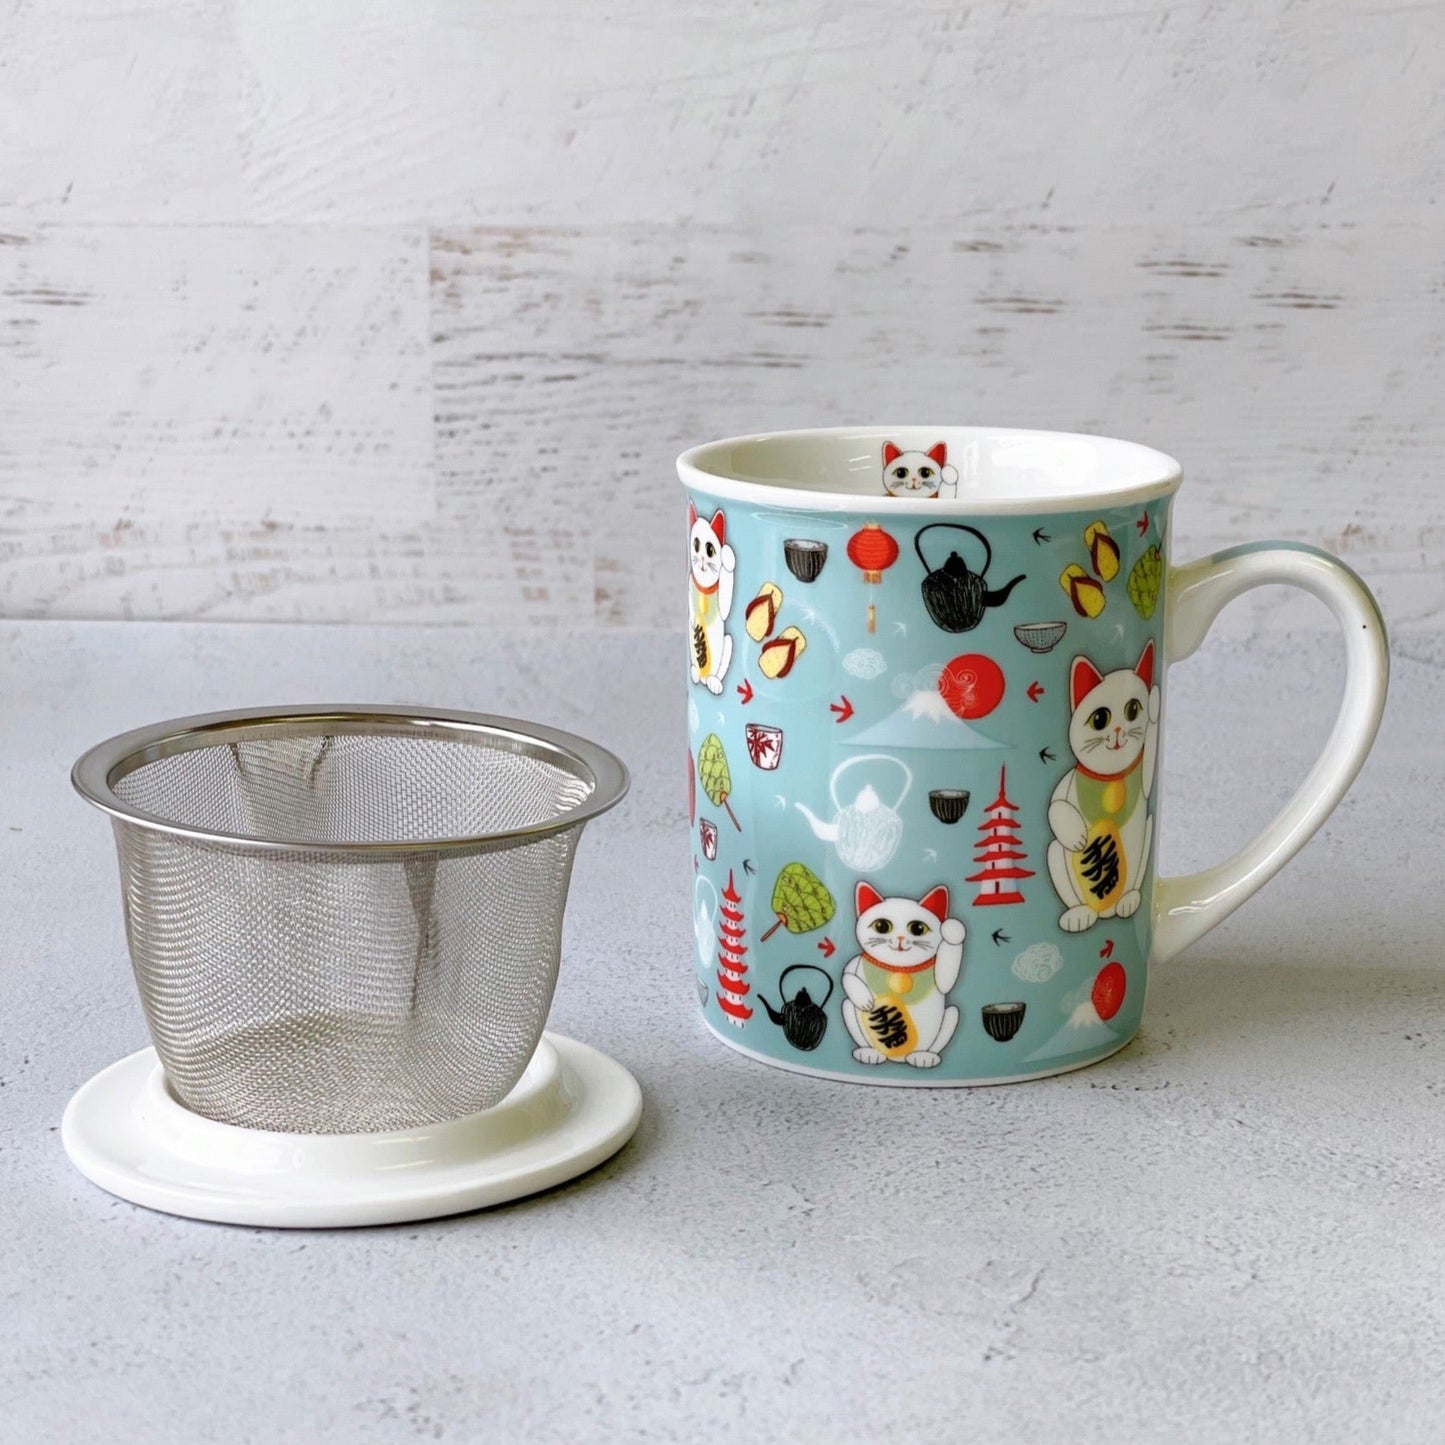 Tea Mug "Lucky Cat" with stainless steel strainer - Tico Coffee Roasters